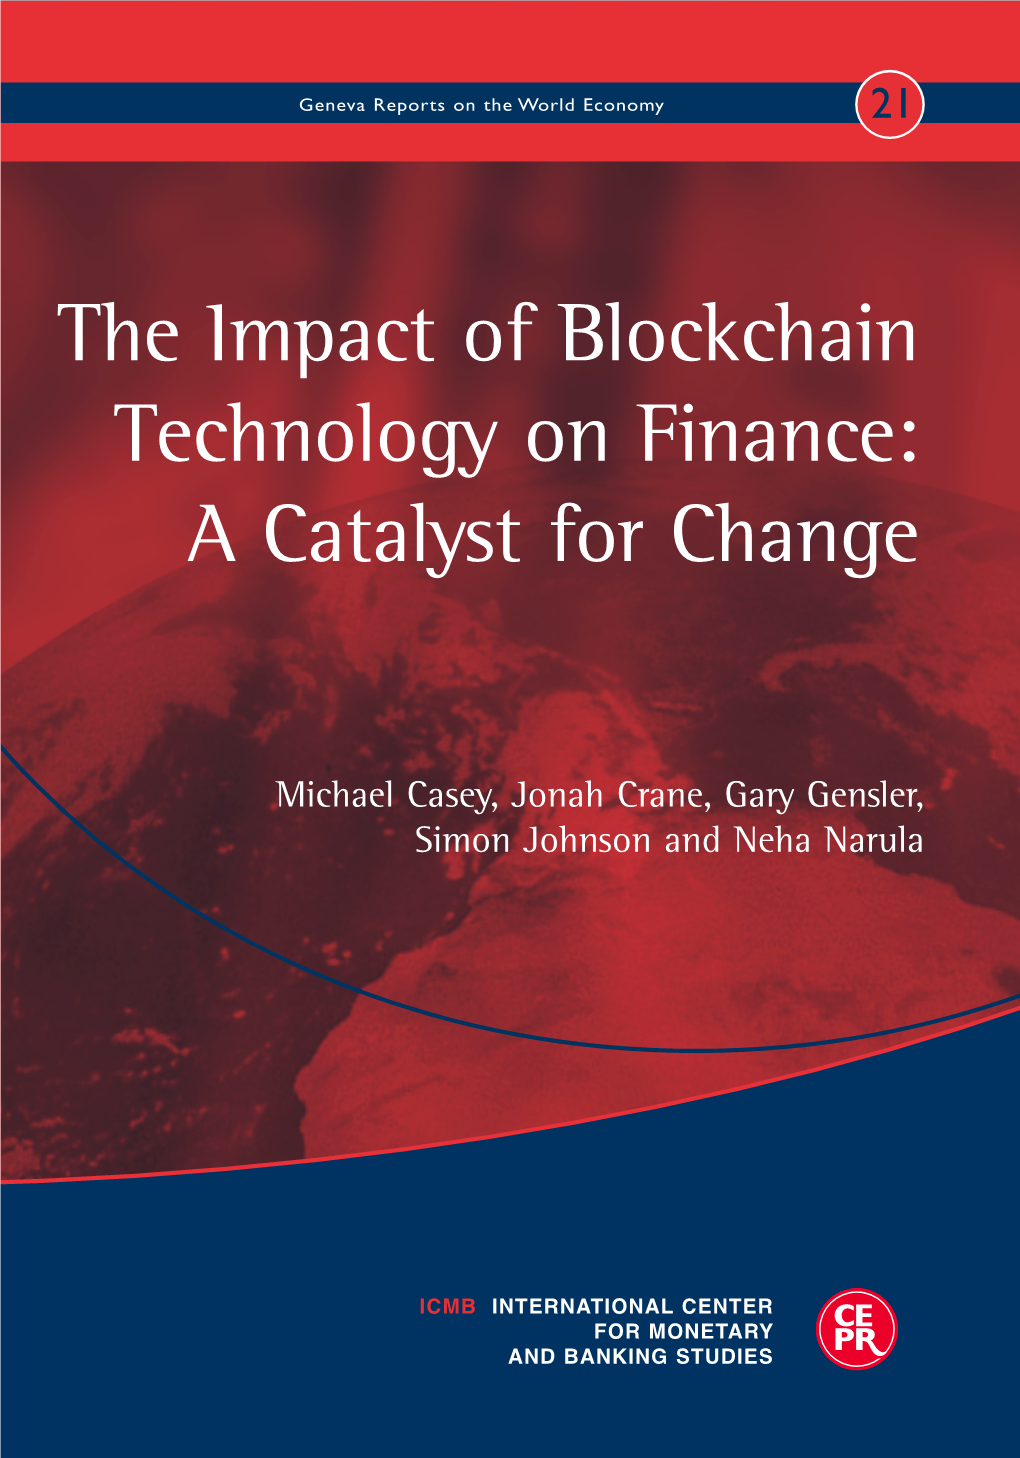 The Impact of Blockchain Technology on Finance: a Catalyst for Change for Catalyst a Finance: on Technology Blockchain of Impact The